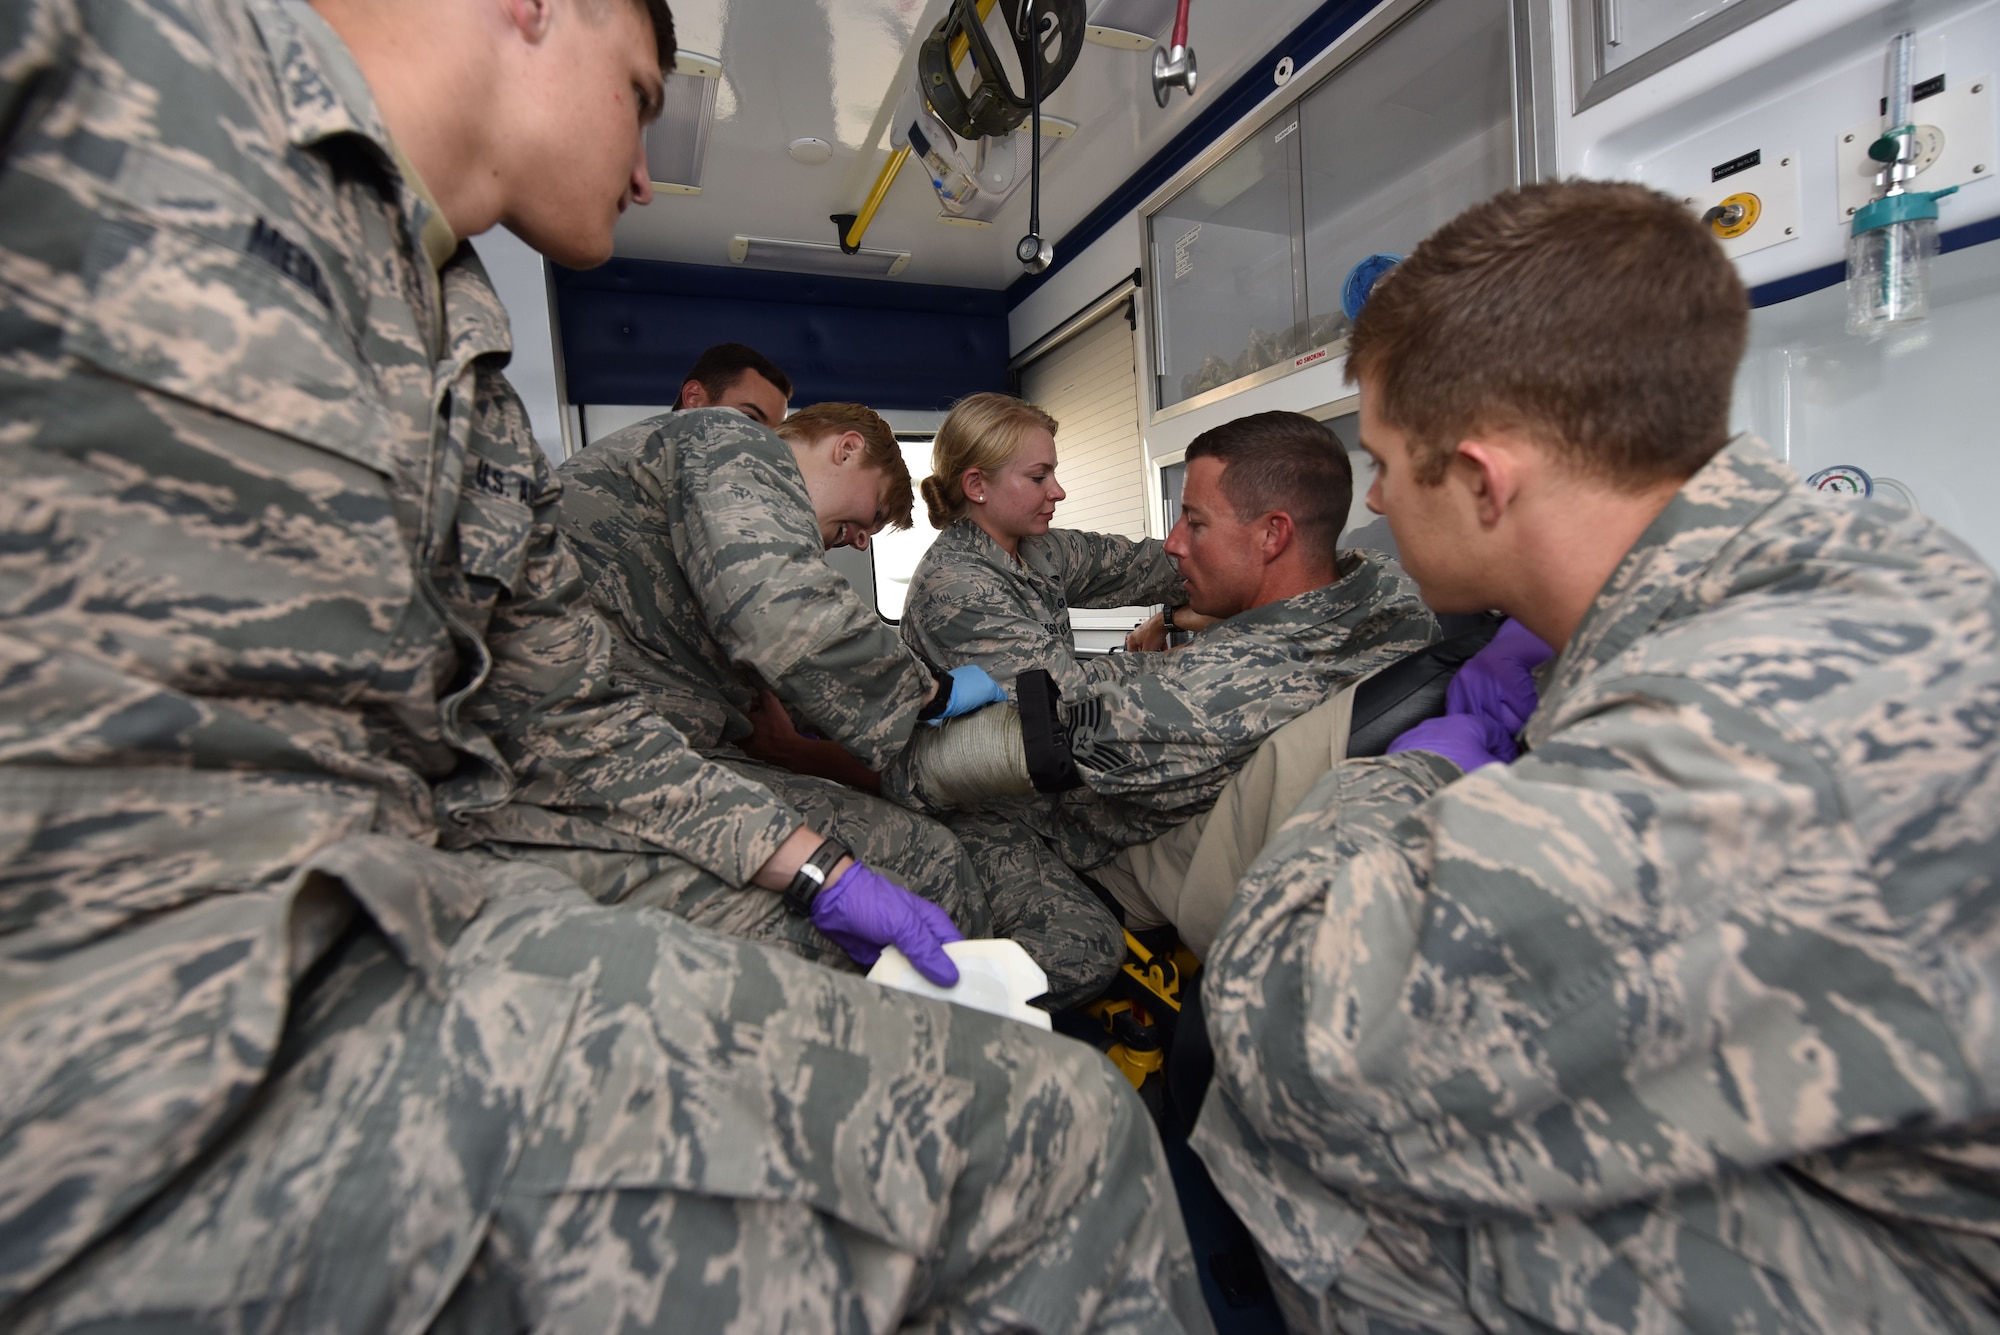 U.S. Air Force Academy cadets practice hemhorrage control techniques on Tech. Sgt. Ryan Folks, 27th Expeditionary Fighter Squadron medical element, in the back of an ambulance at an undisclosed location in southwest Asia, July 6, 2017.